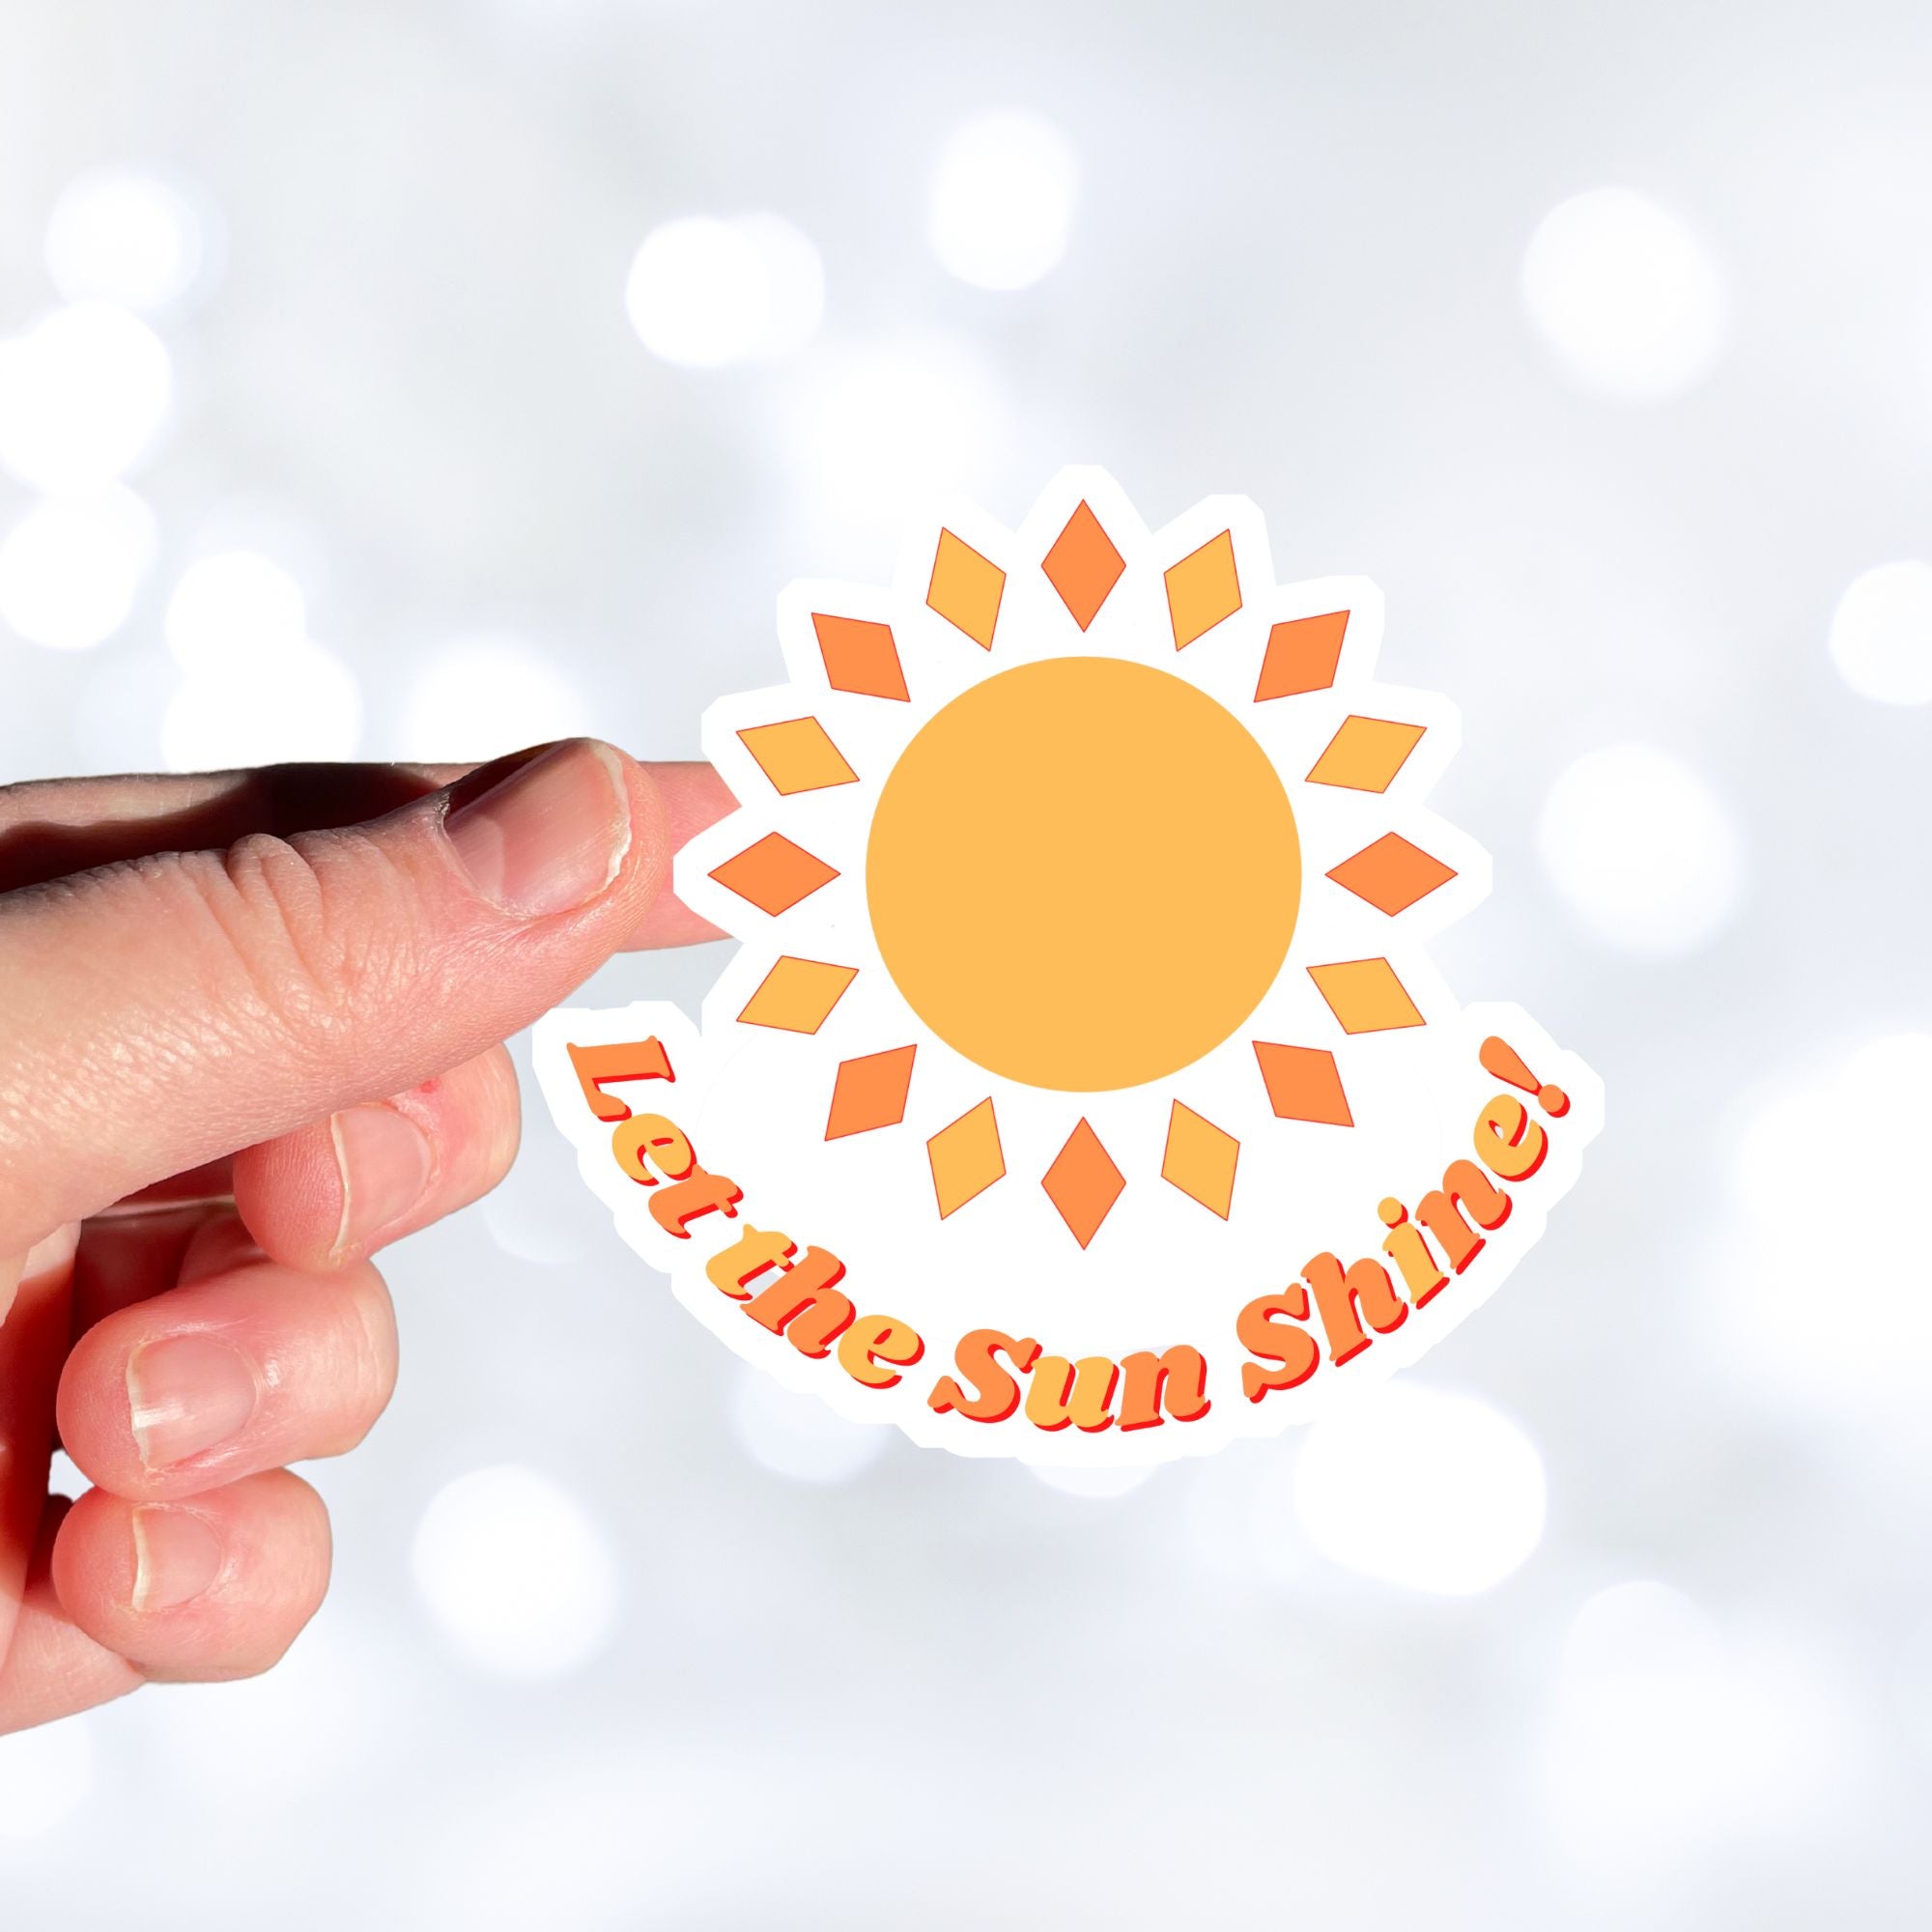 Let the Sun Shine! This bright and fun individual die-cut sticker features a yellow and orange sun with the words "Let the Sun Shine!" below. This image shows a hand holding the Let the Sun Shine! sticker.